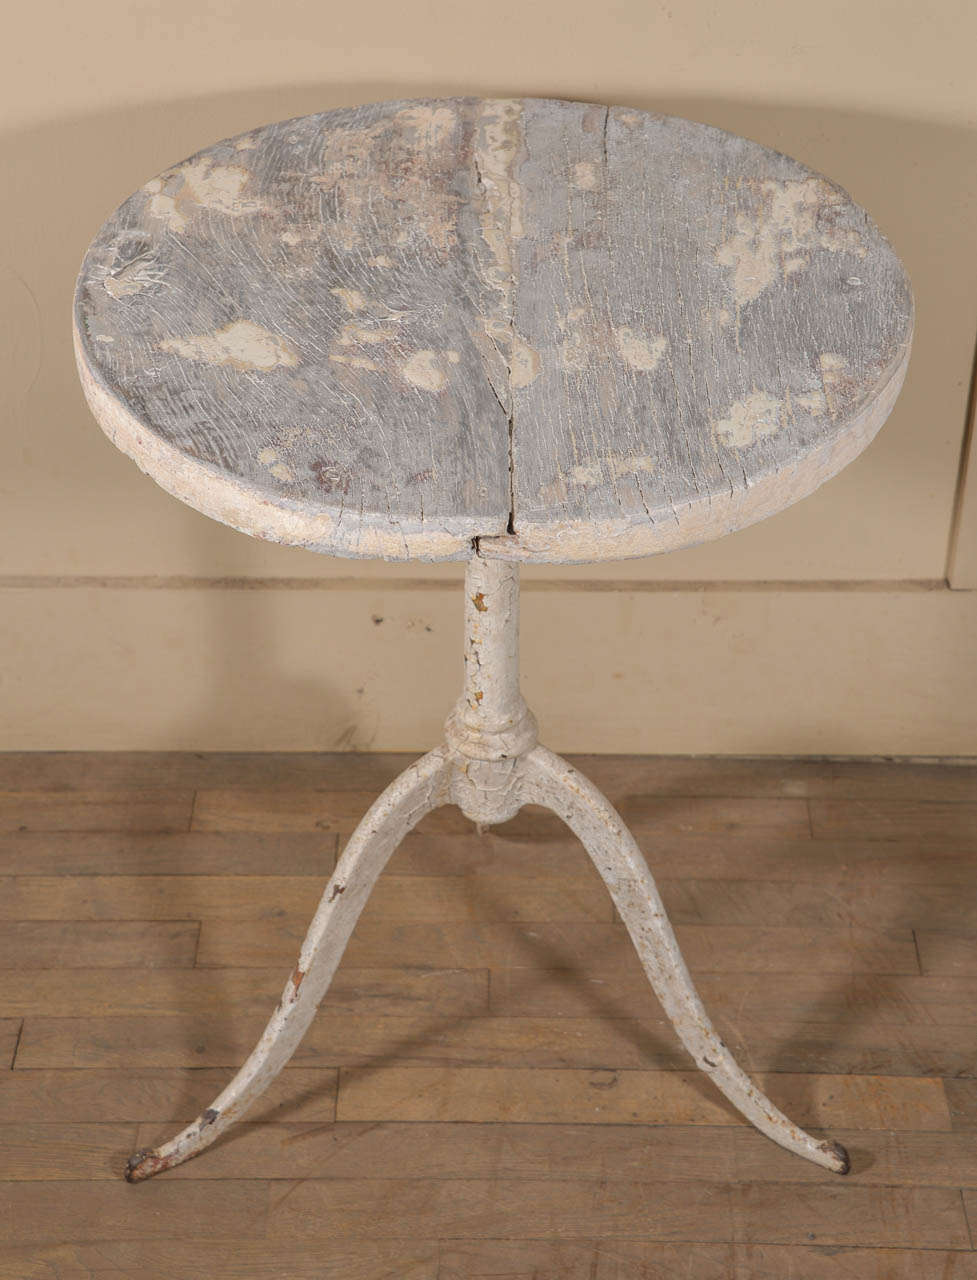 18th century painted French bistro-style table with iron base and wood top.